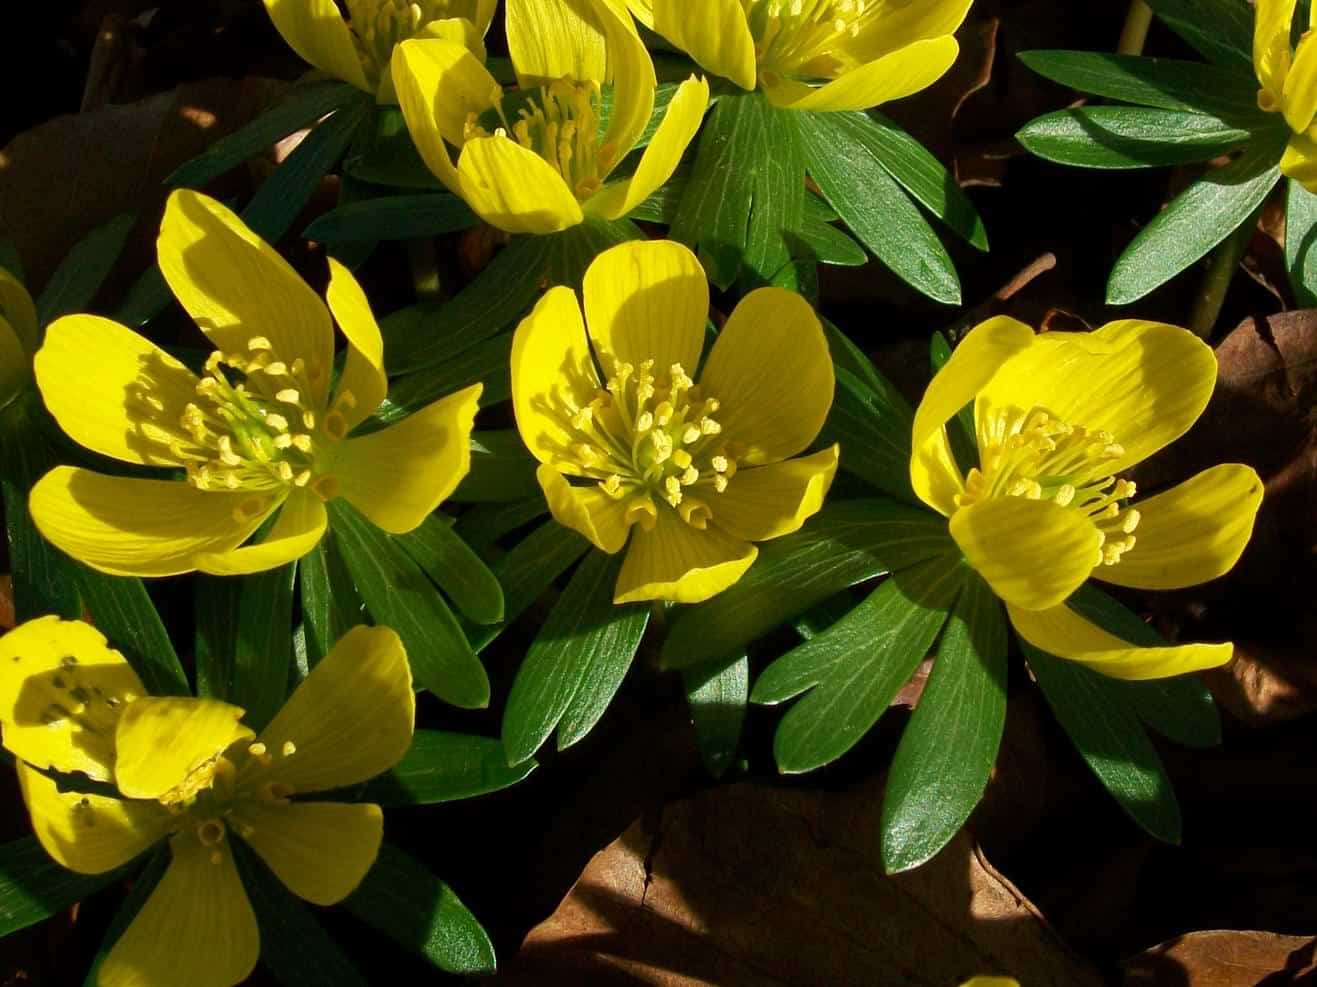 Winter aconite. the most exquisite garden flowers for summer, winter & spring, with vibrant images.